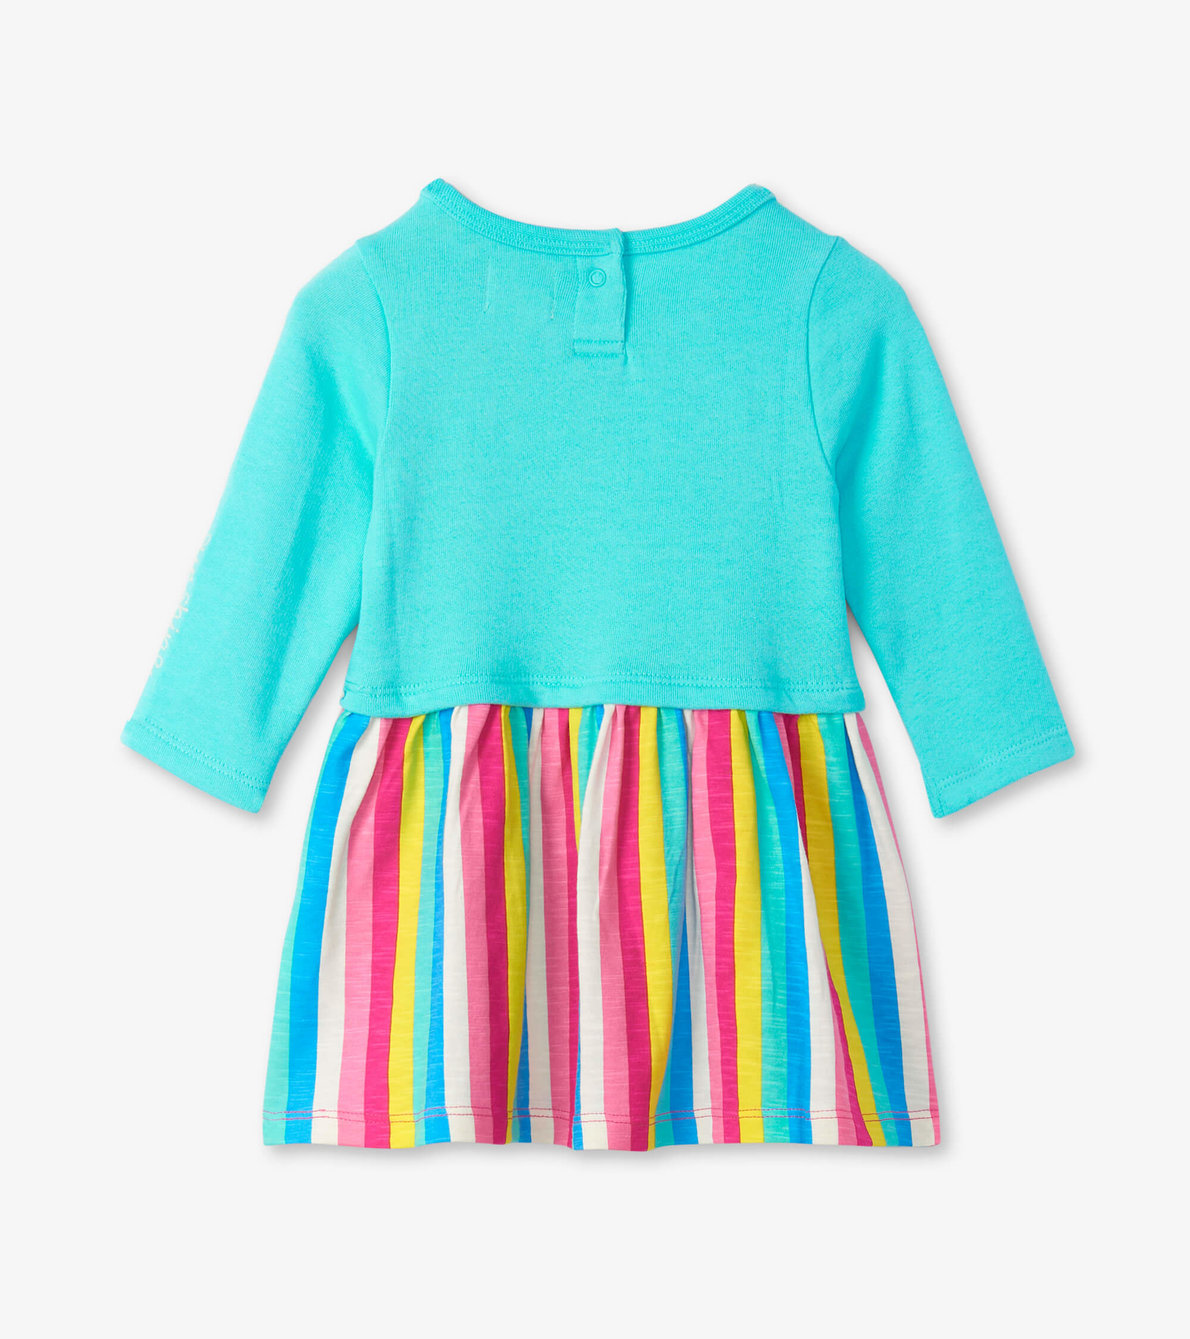 View larger image of Radiant Rainbow Layered Knit Dress